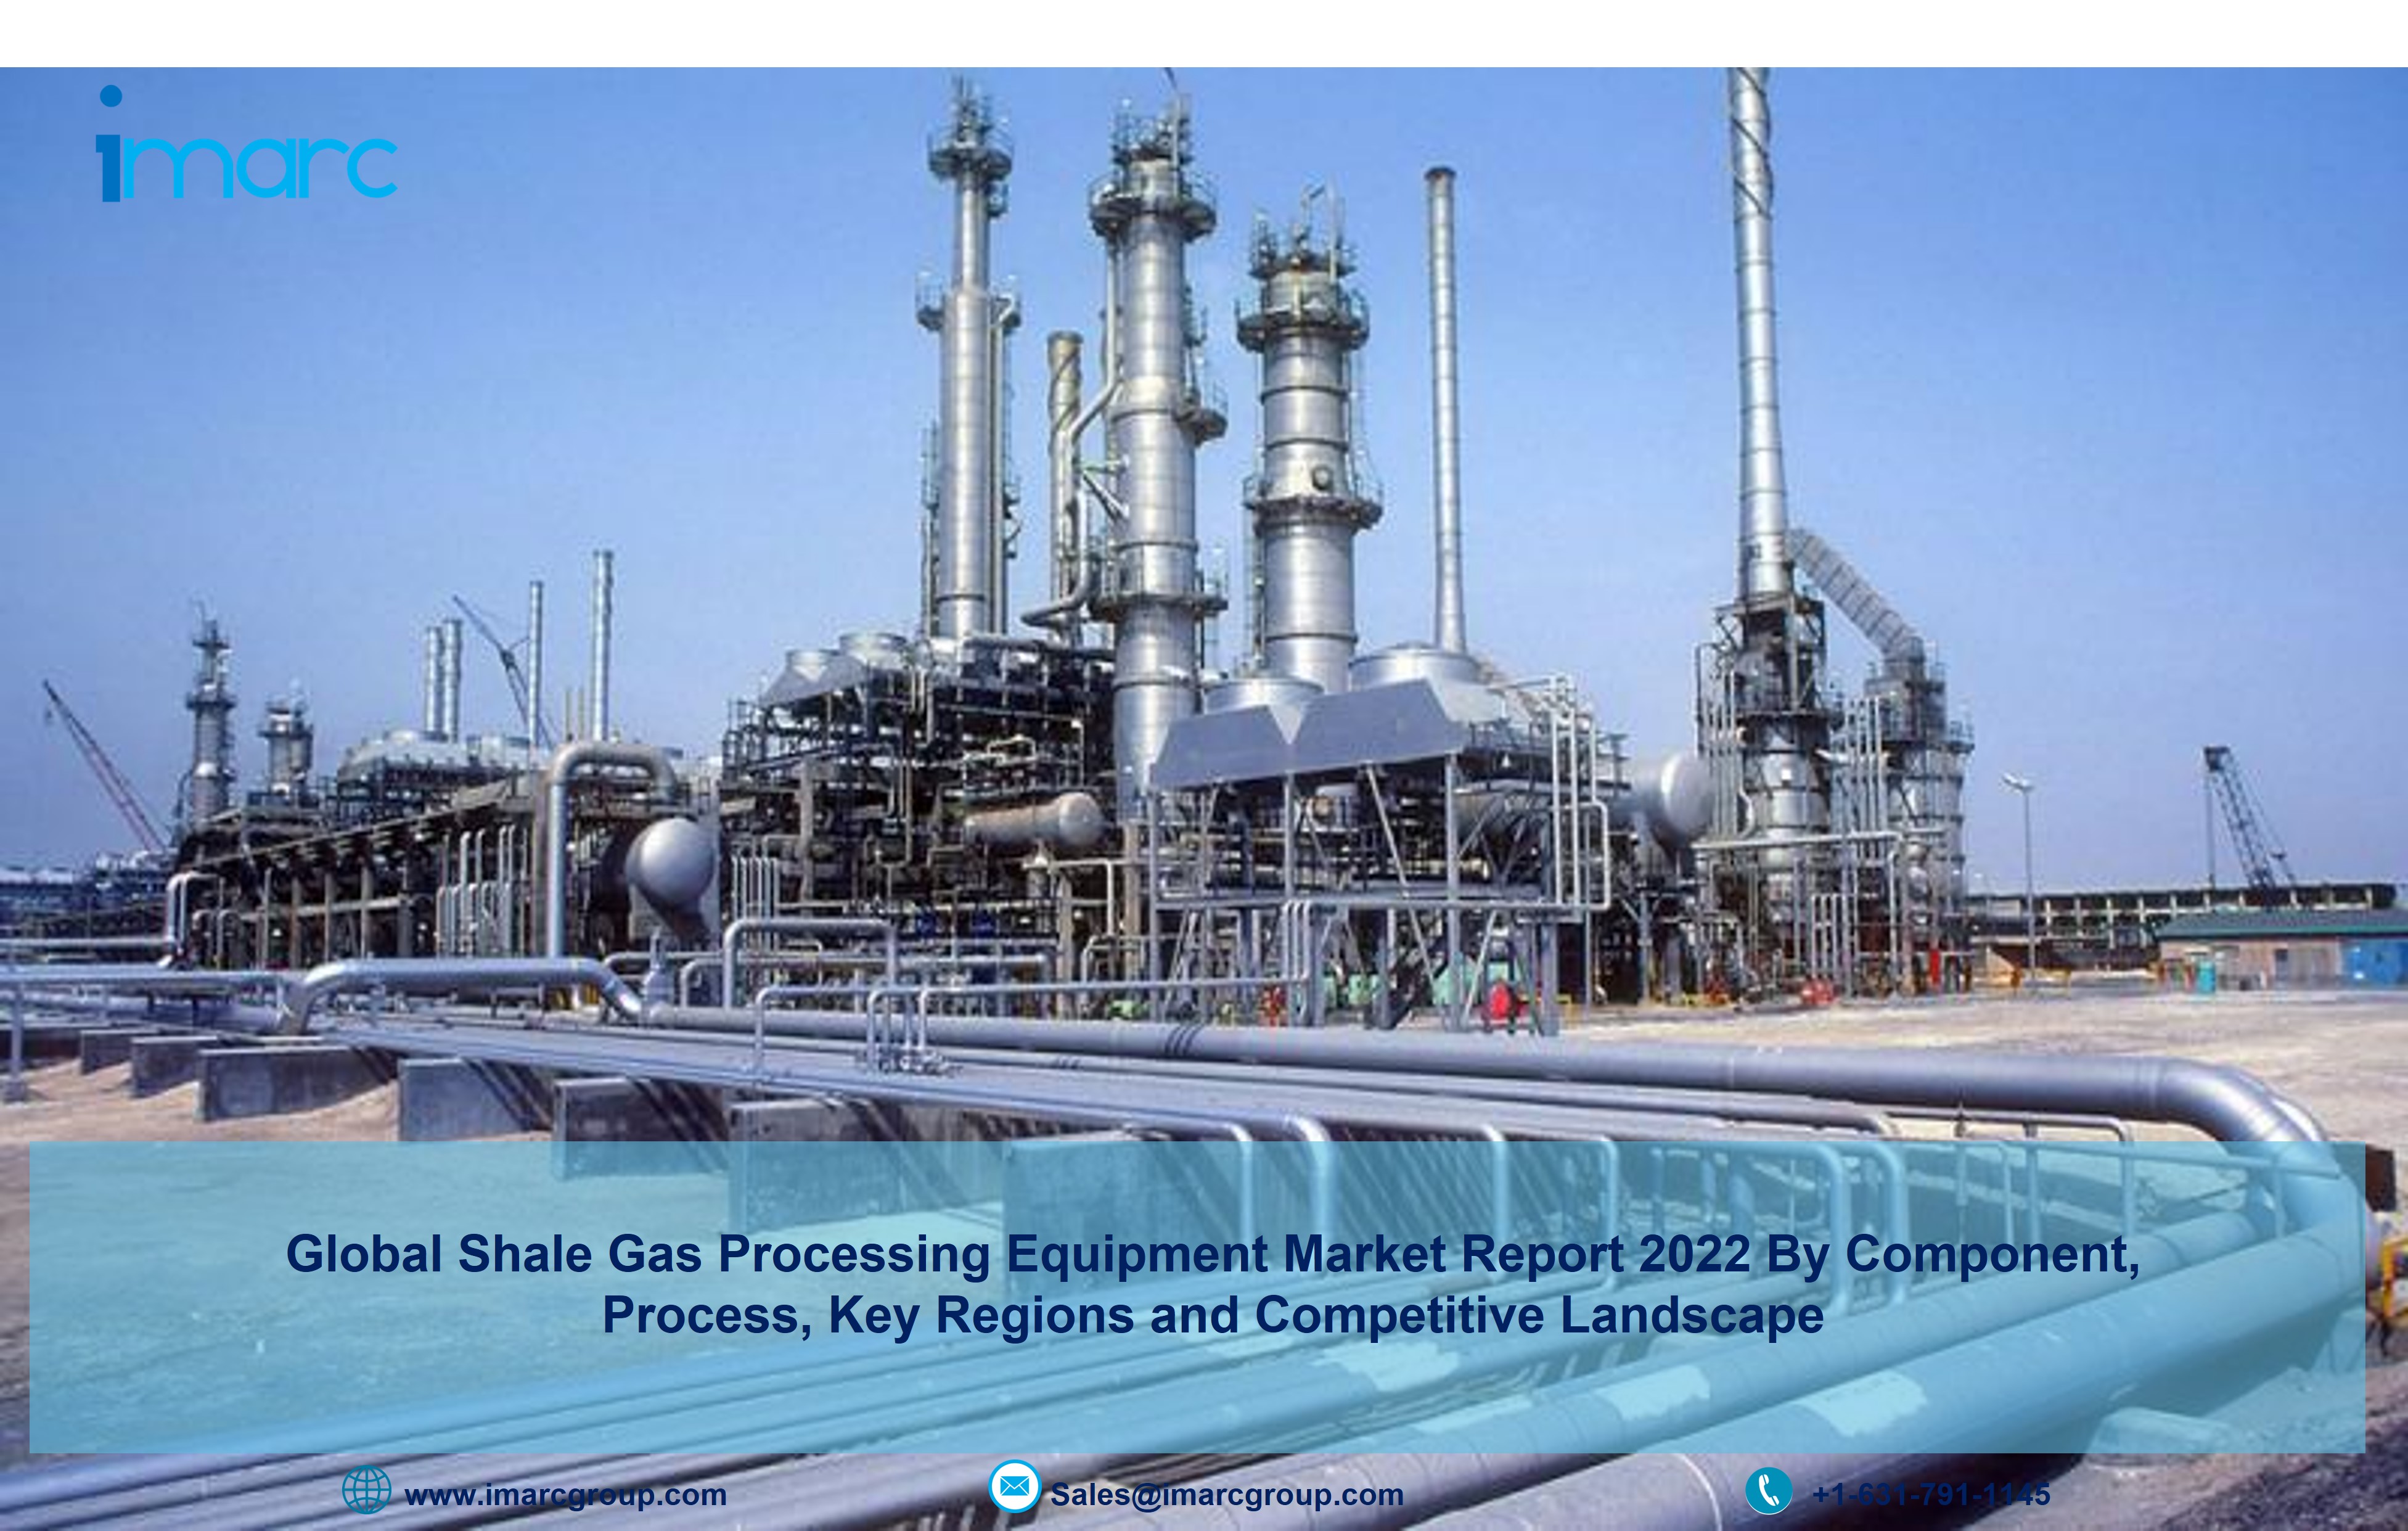 Shale Gas Processing Equipment Market Size 2022-27: Global Industry Trends, Share, Growth and Forecast